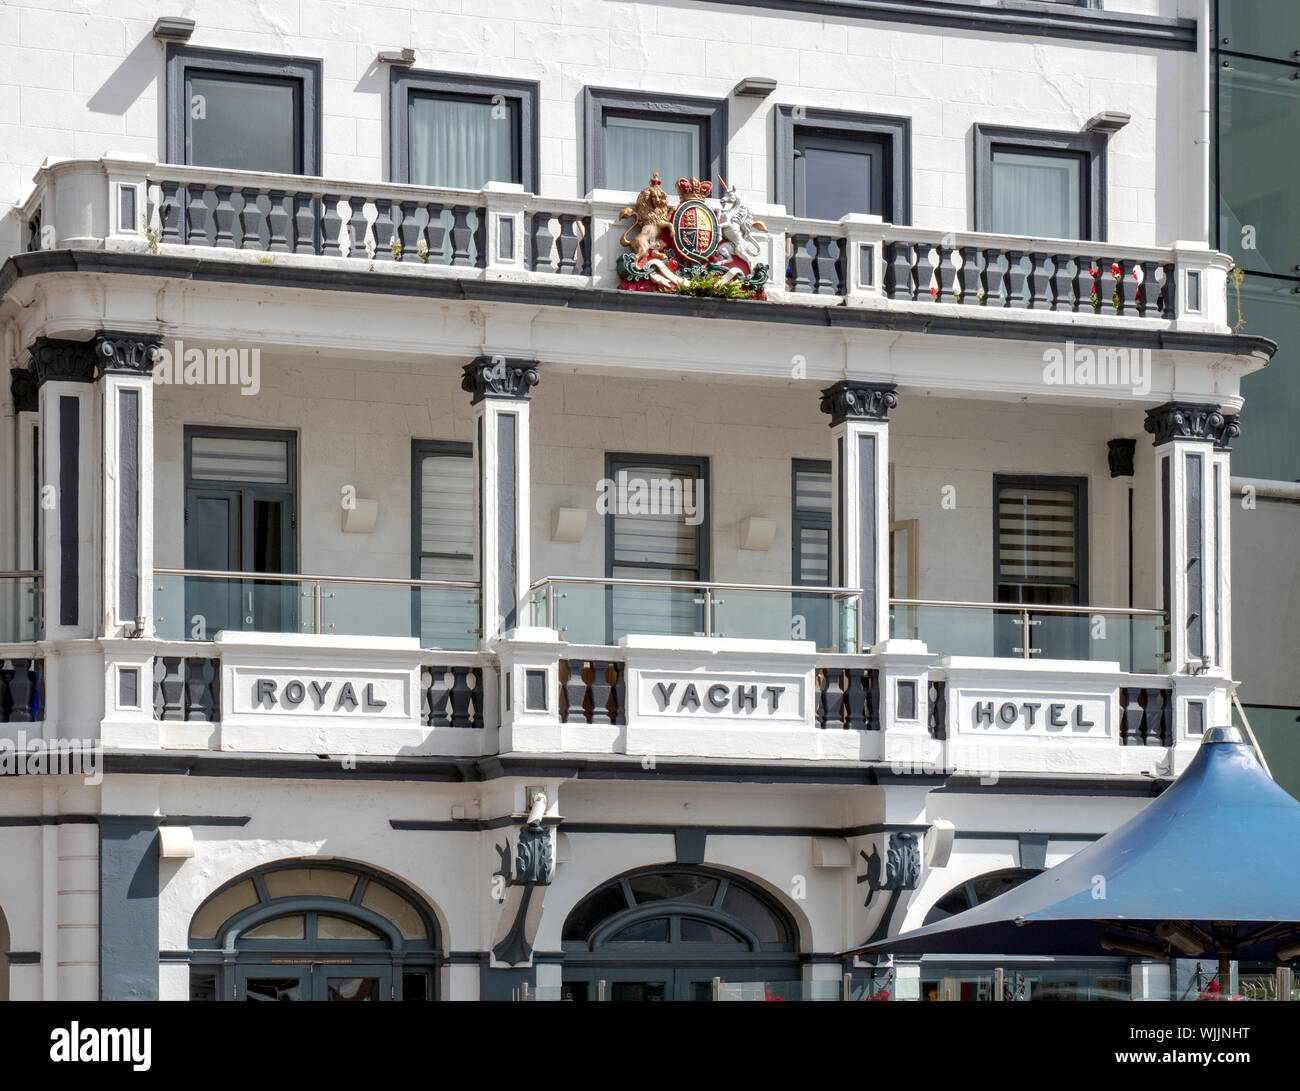 Le Royal Yacht Hotel, Weighbridge, St Helier, Jersey, Channel Islands. JE2 3NF Banque D'Images